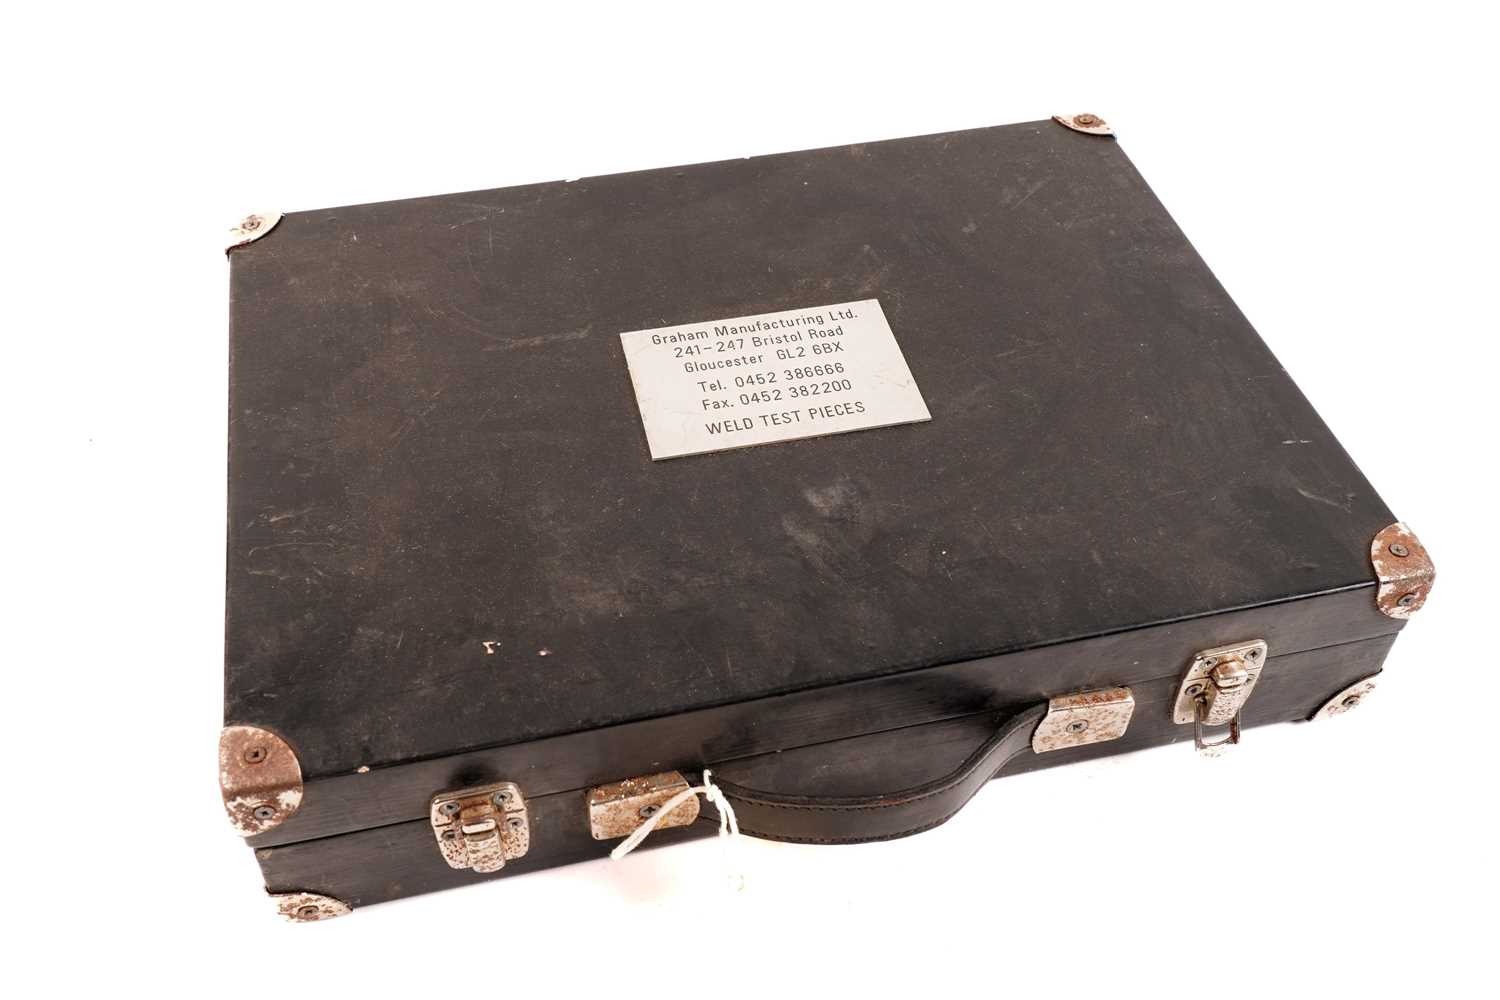 Lot 192 - A cased set of weld test pieces